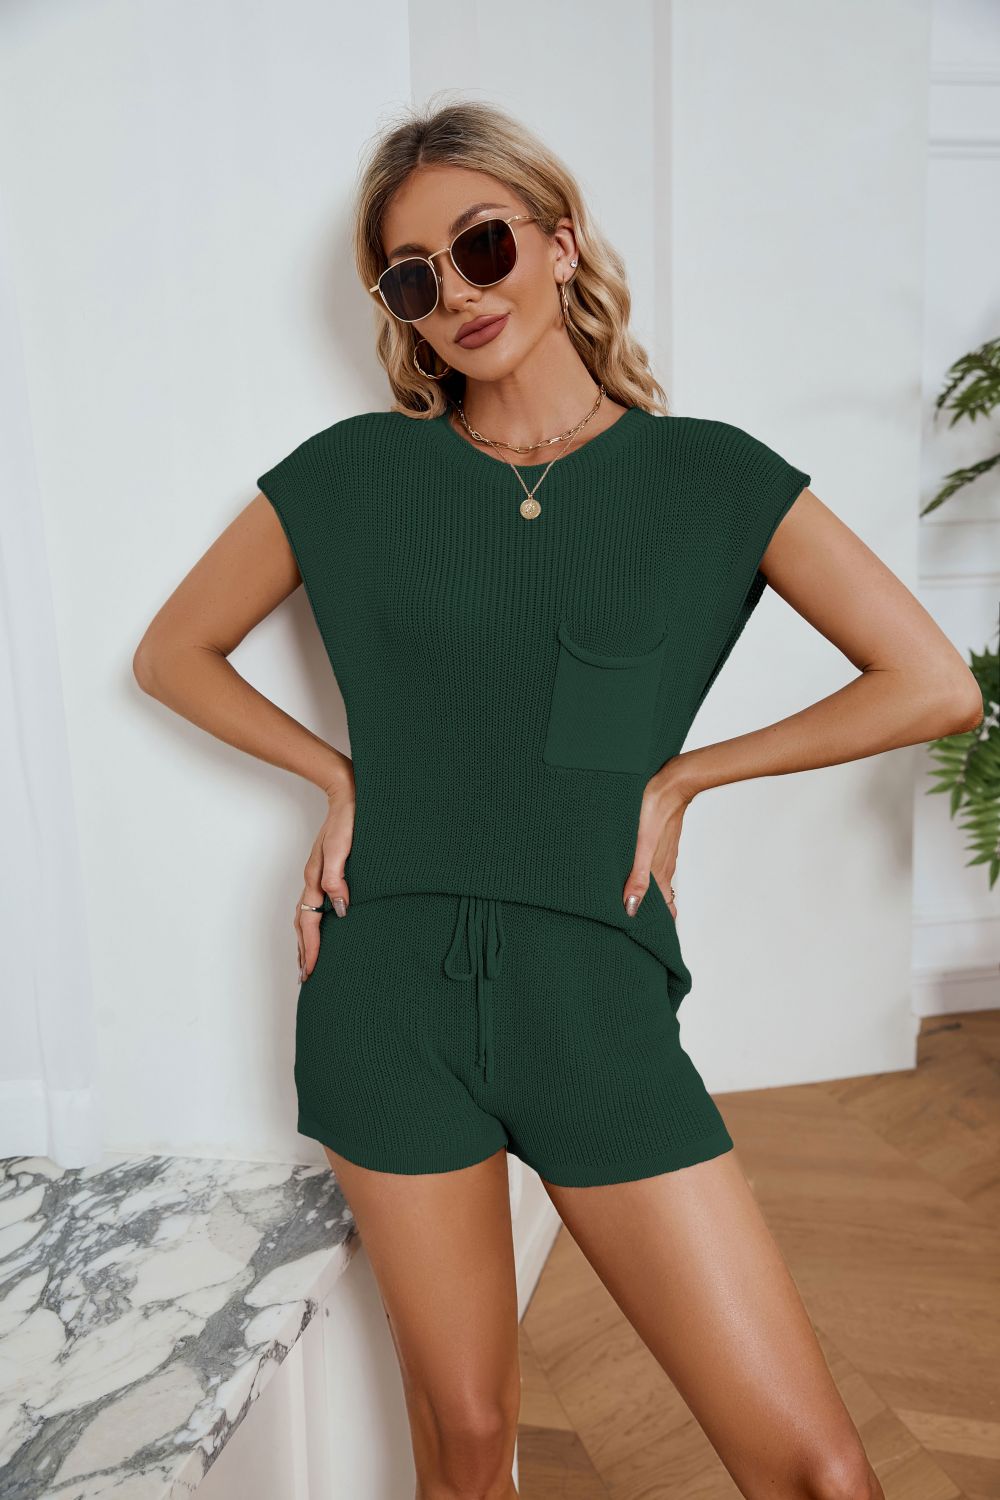 Ribbed Round Neck Pocket Knit Top and Shorts Set - Fashion Girl Online Store